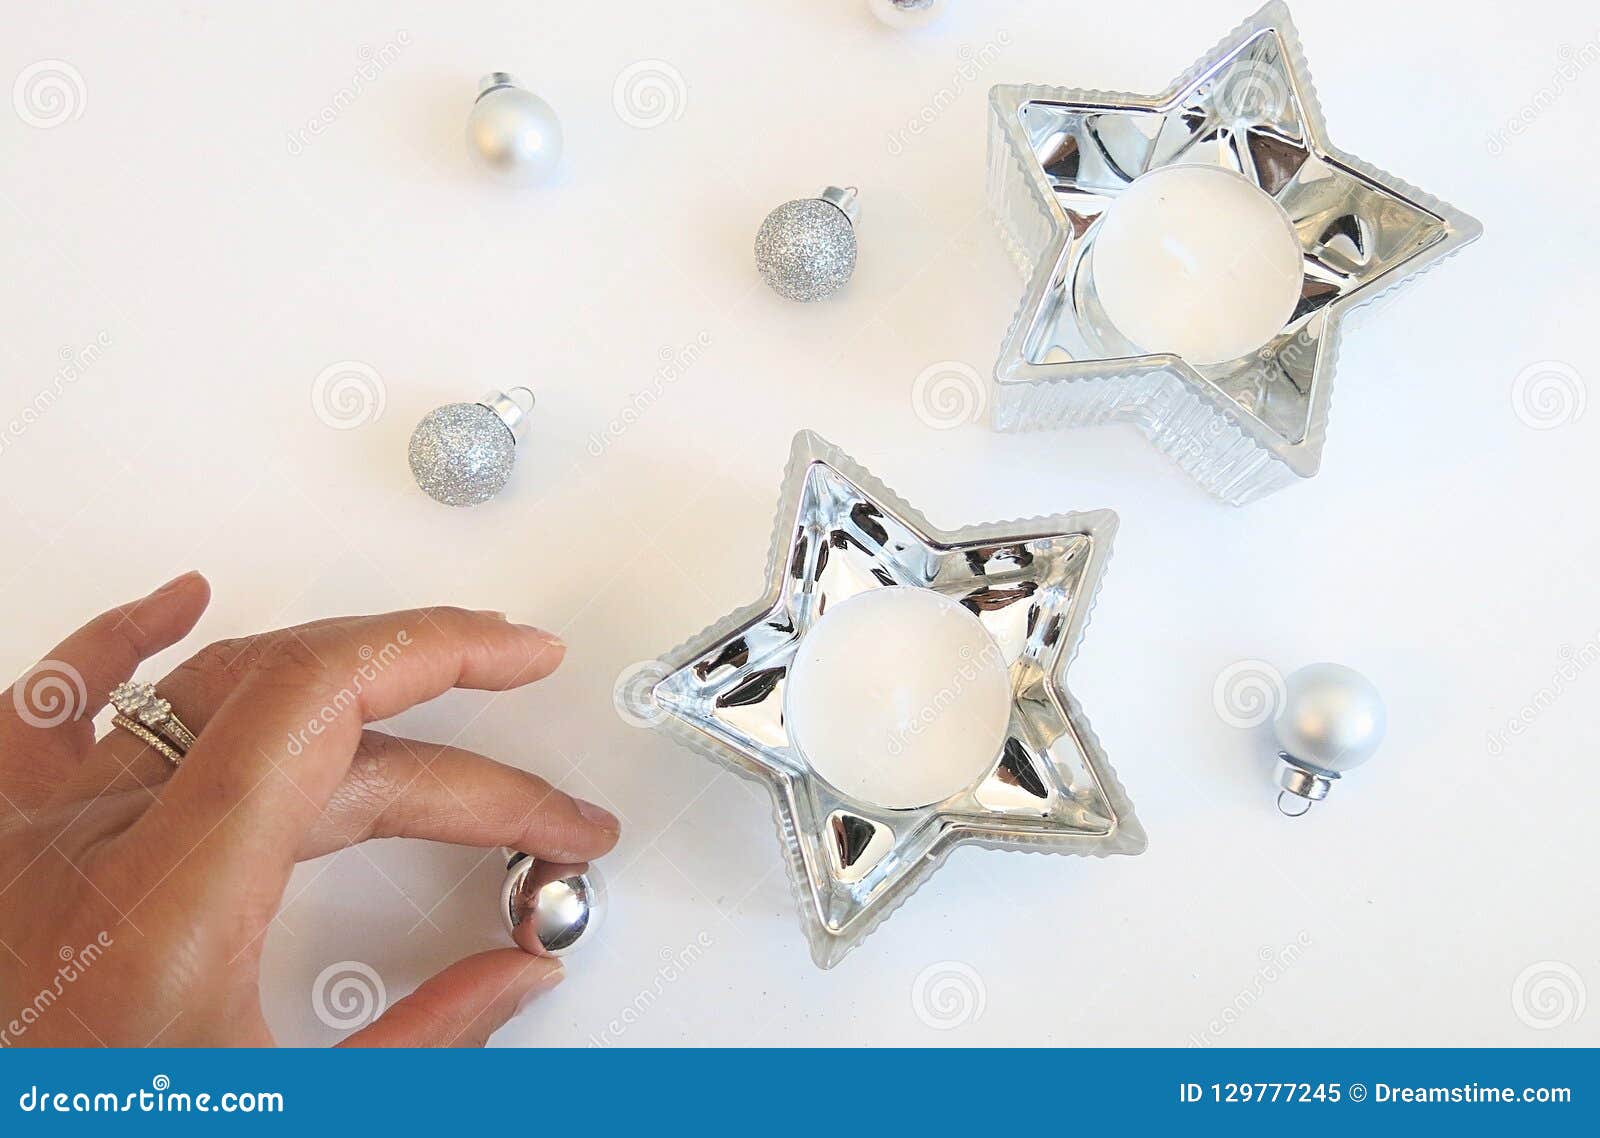 Christmas Composition Of Silver Ornaments And Silver Star